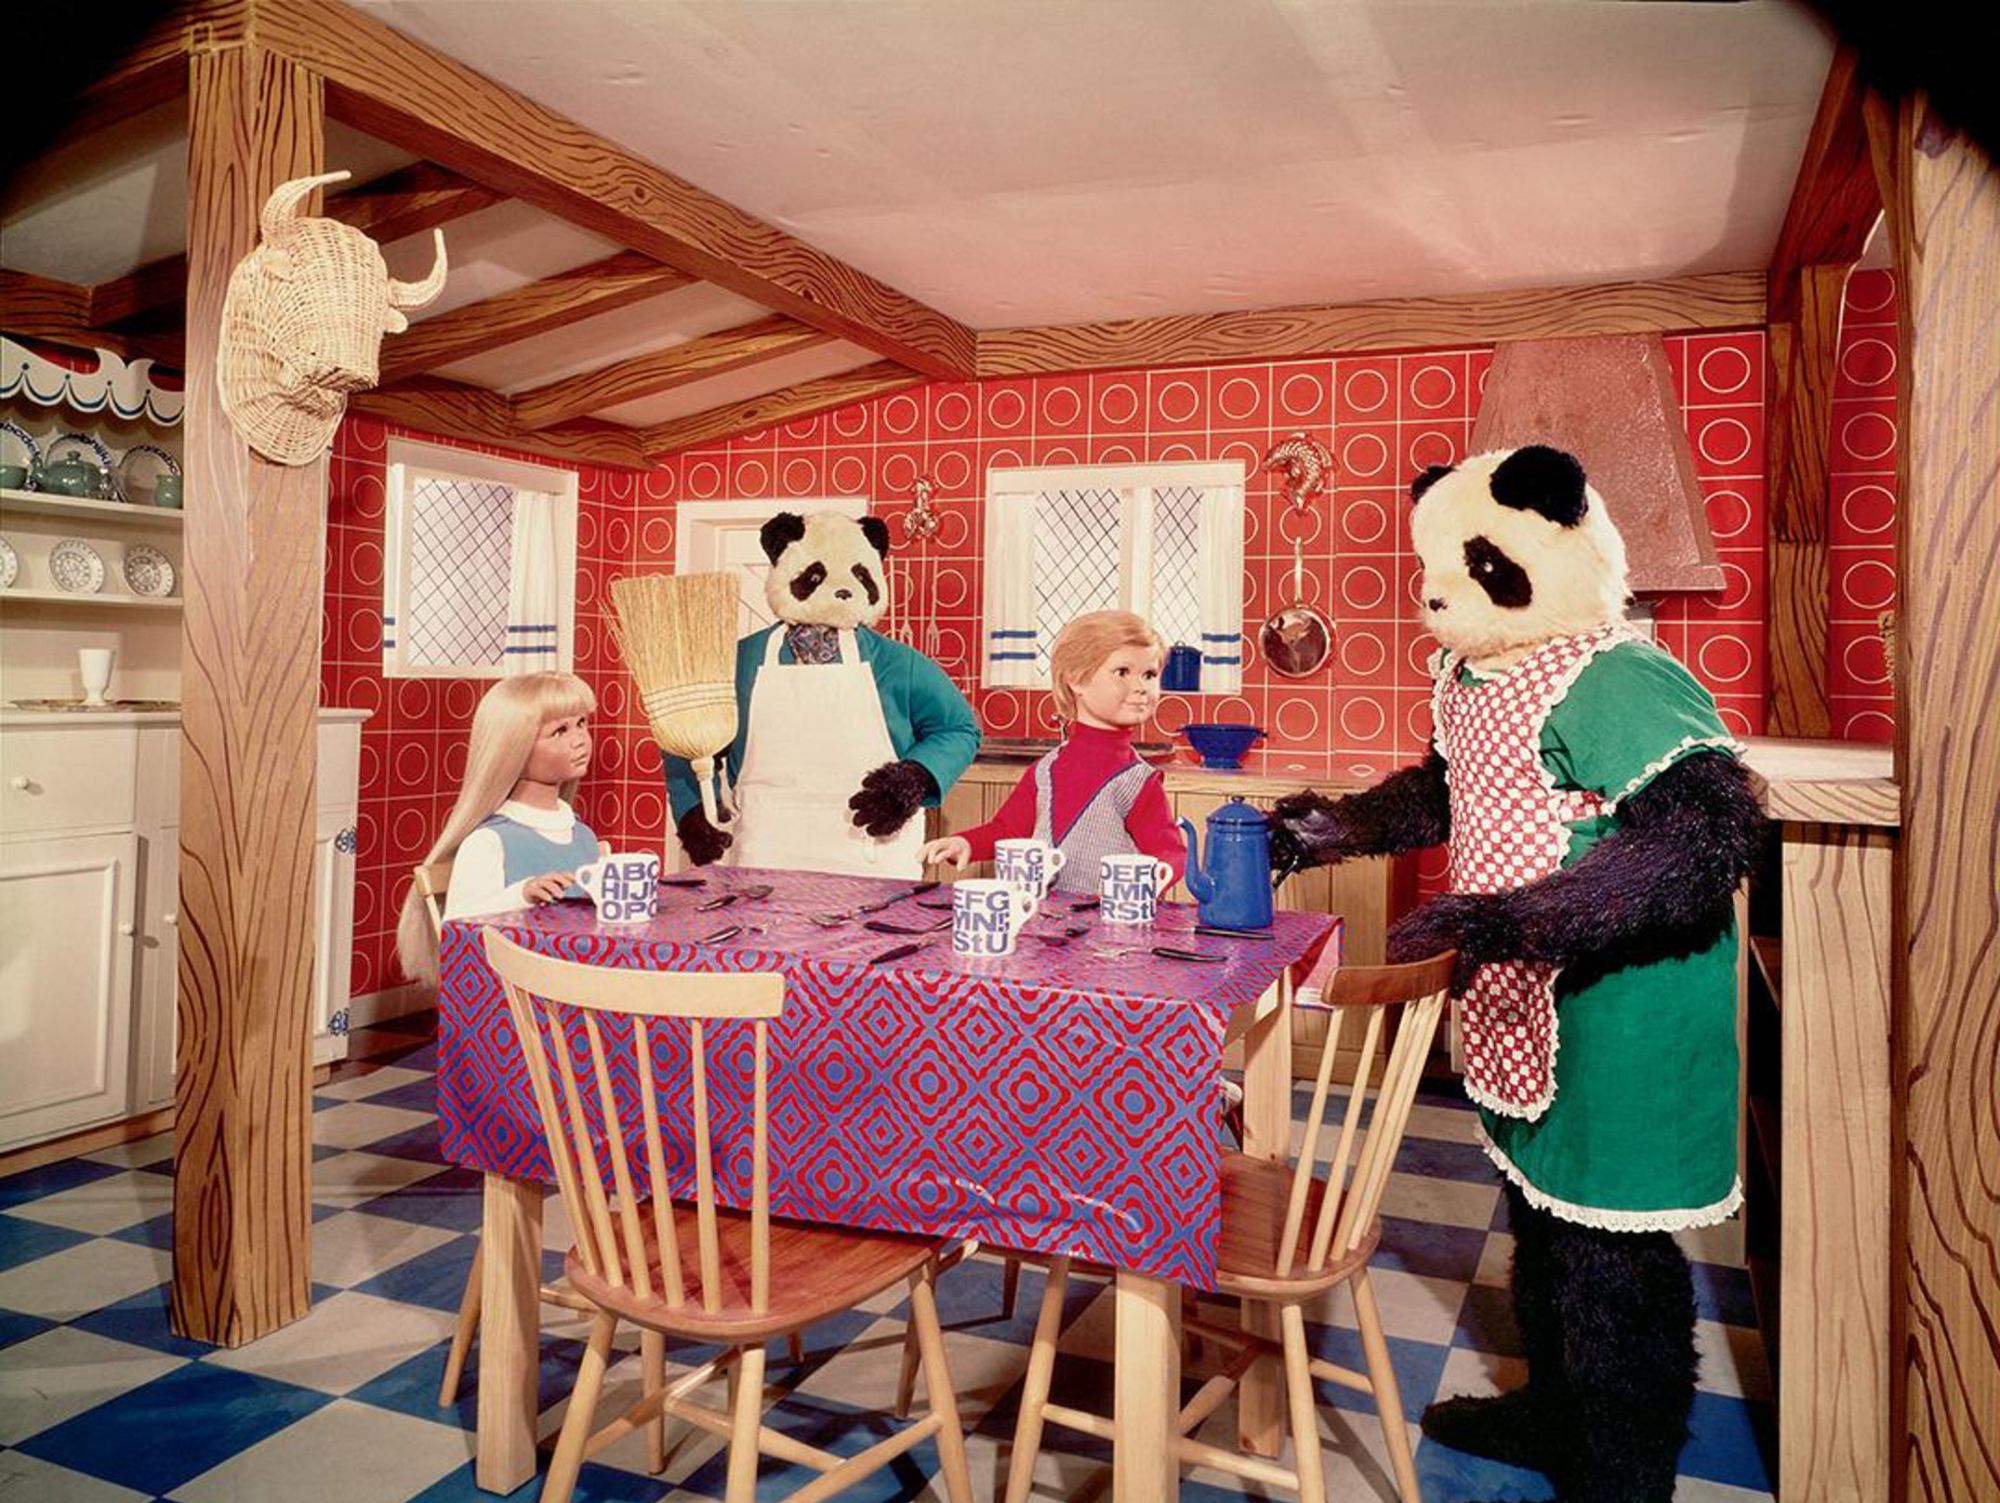 Originally released in 1967, the weekly comic book explored the bizarre domestic set up of two life-sized mannequin children and their “parents” — a pair of humanoid pandas.